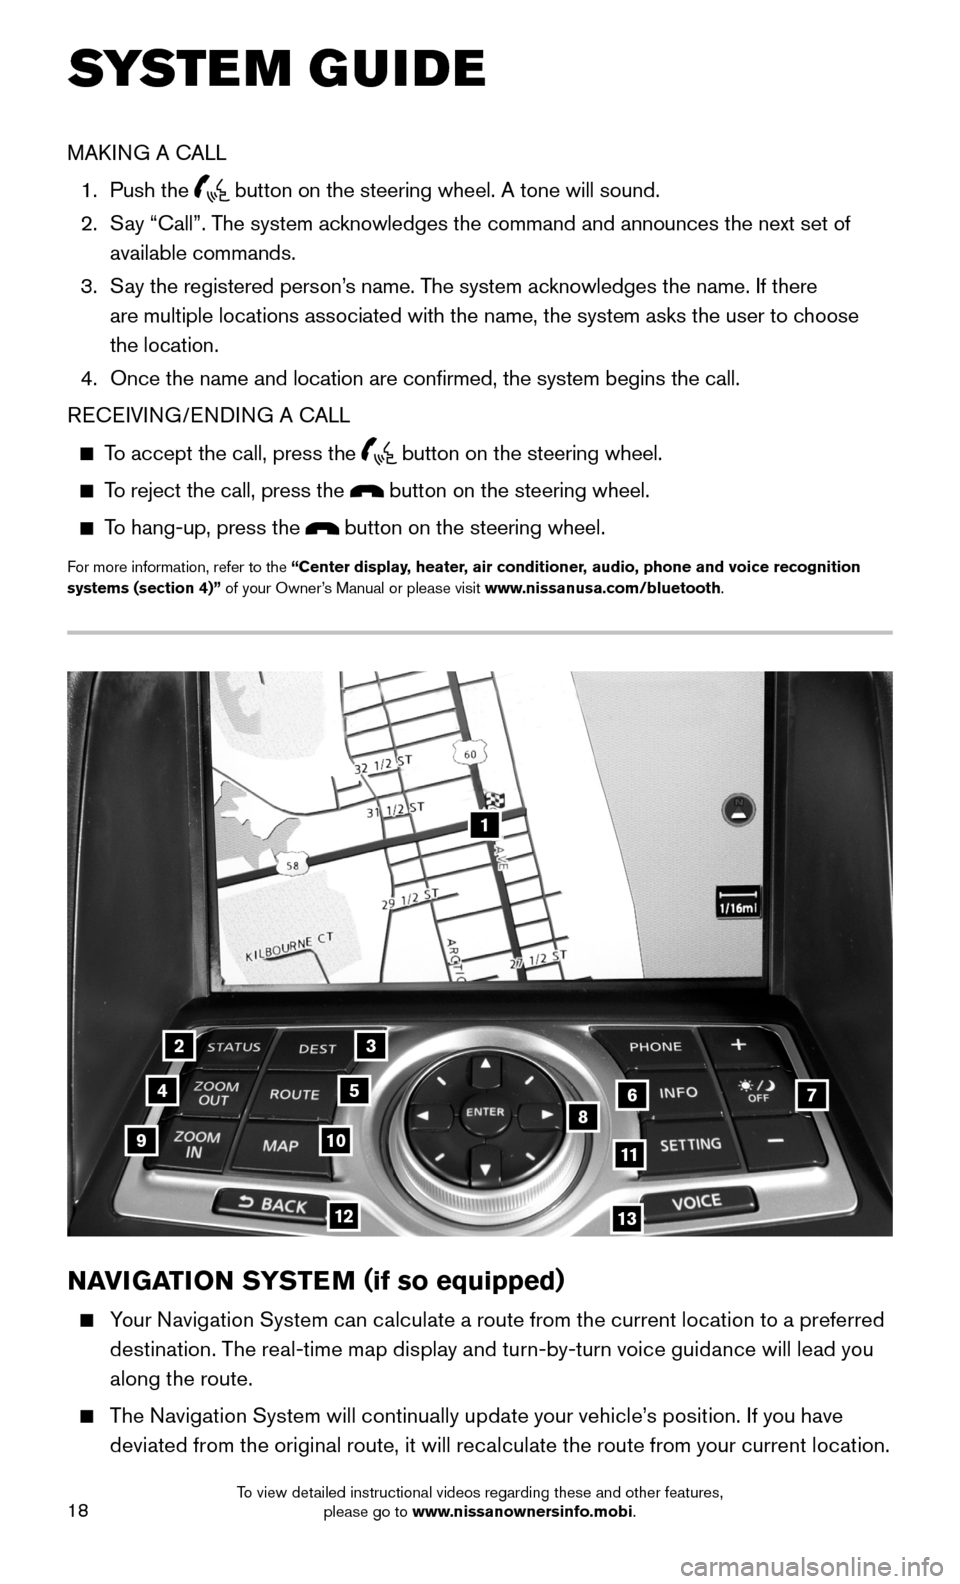 NISSAN 370Z ROADSTER 2015 Z34 Quick Reference Guide 18
1
23
4567891011
1213
NAVIGATION SYSTEM (if so equipped)
     Your Navigation System can calculate a route from the current location to a preferred 
destination. The real-time map display and turn-b